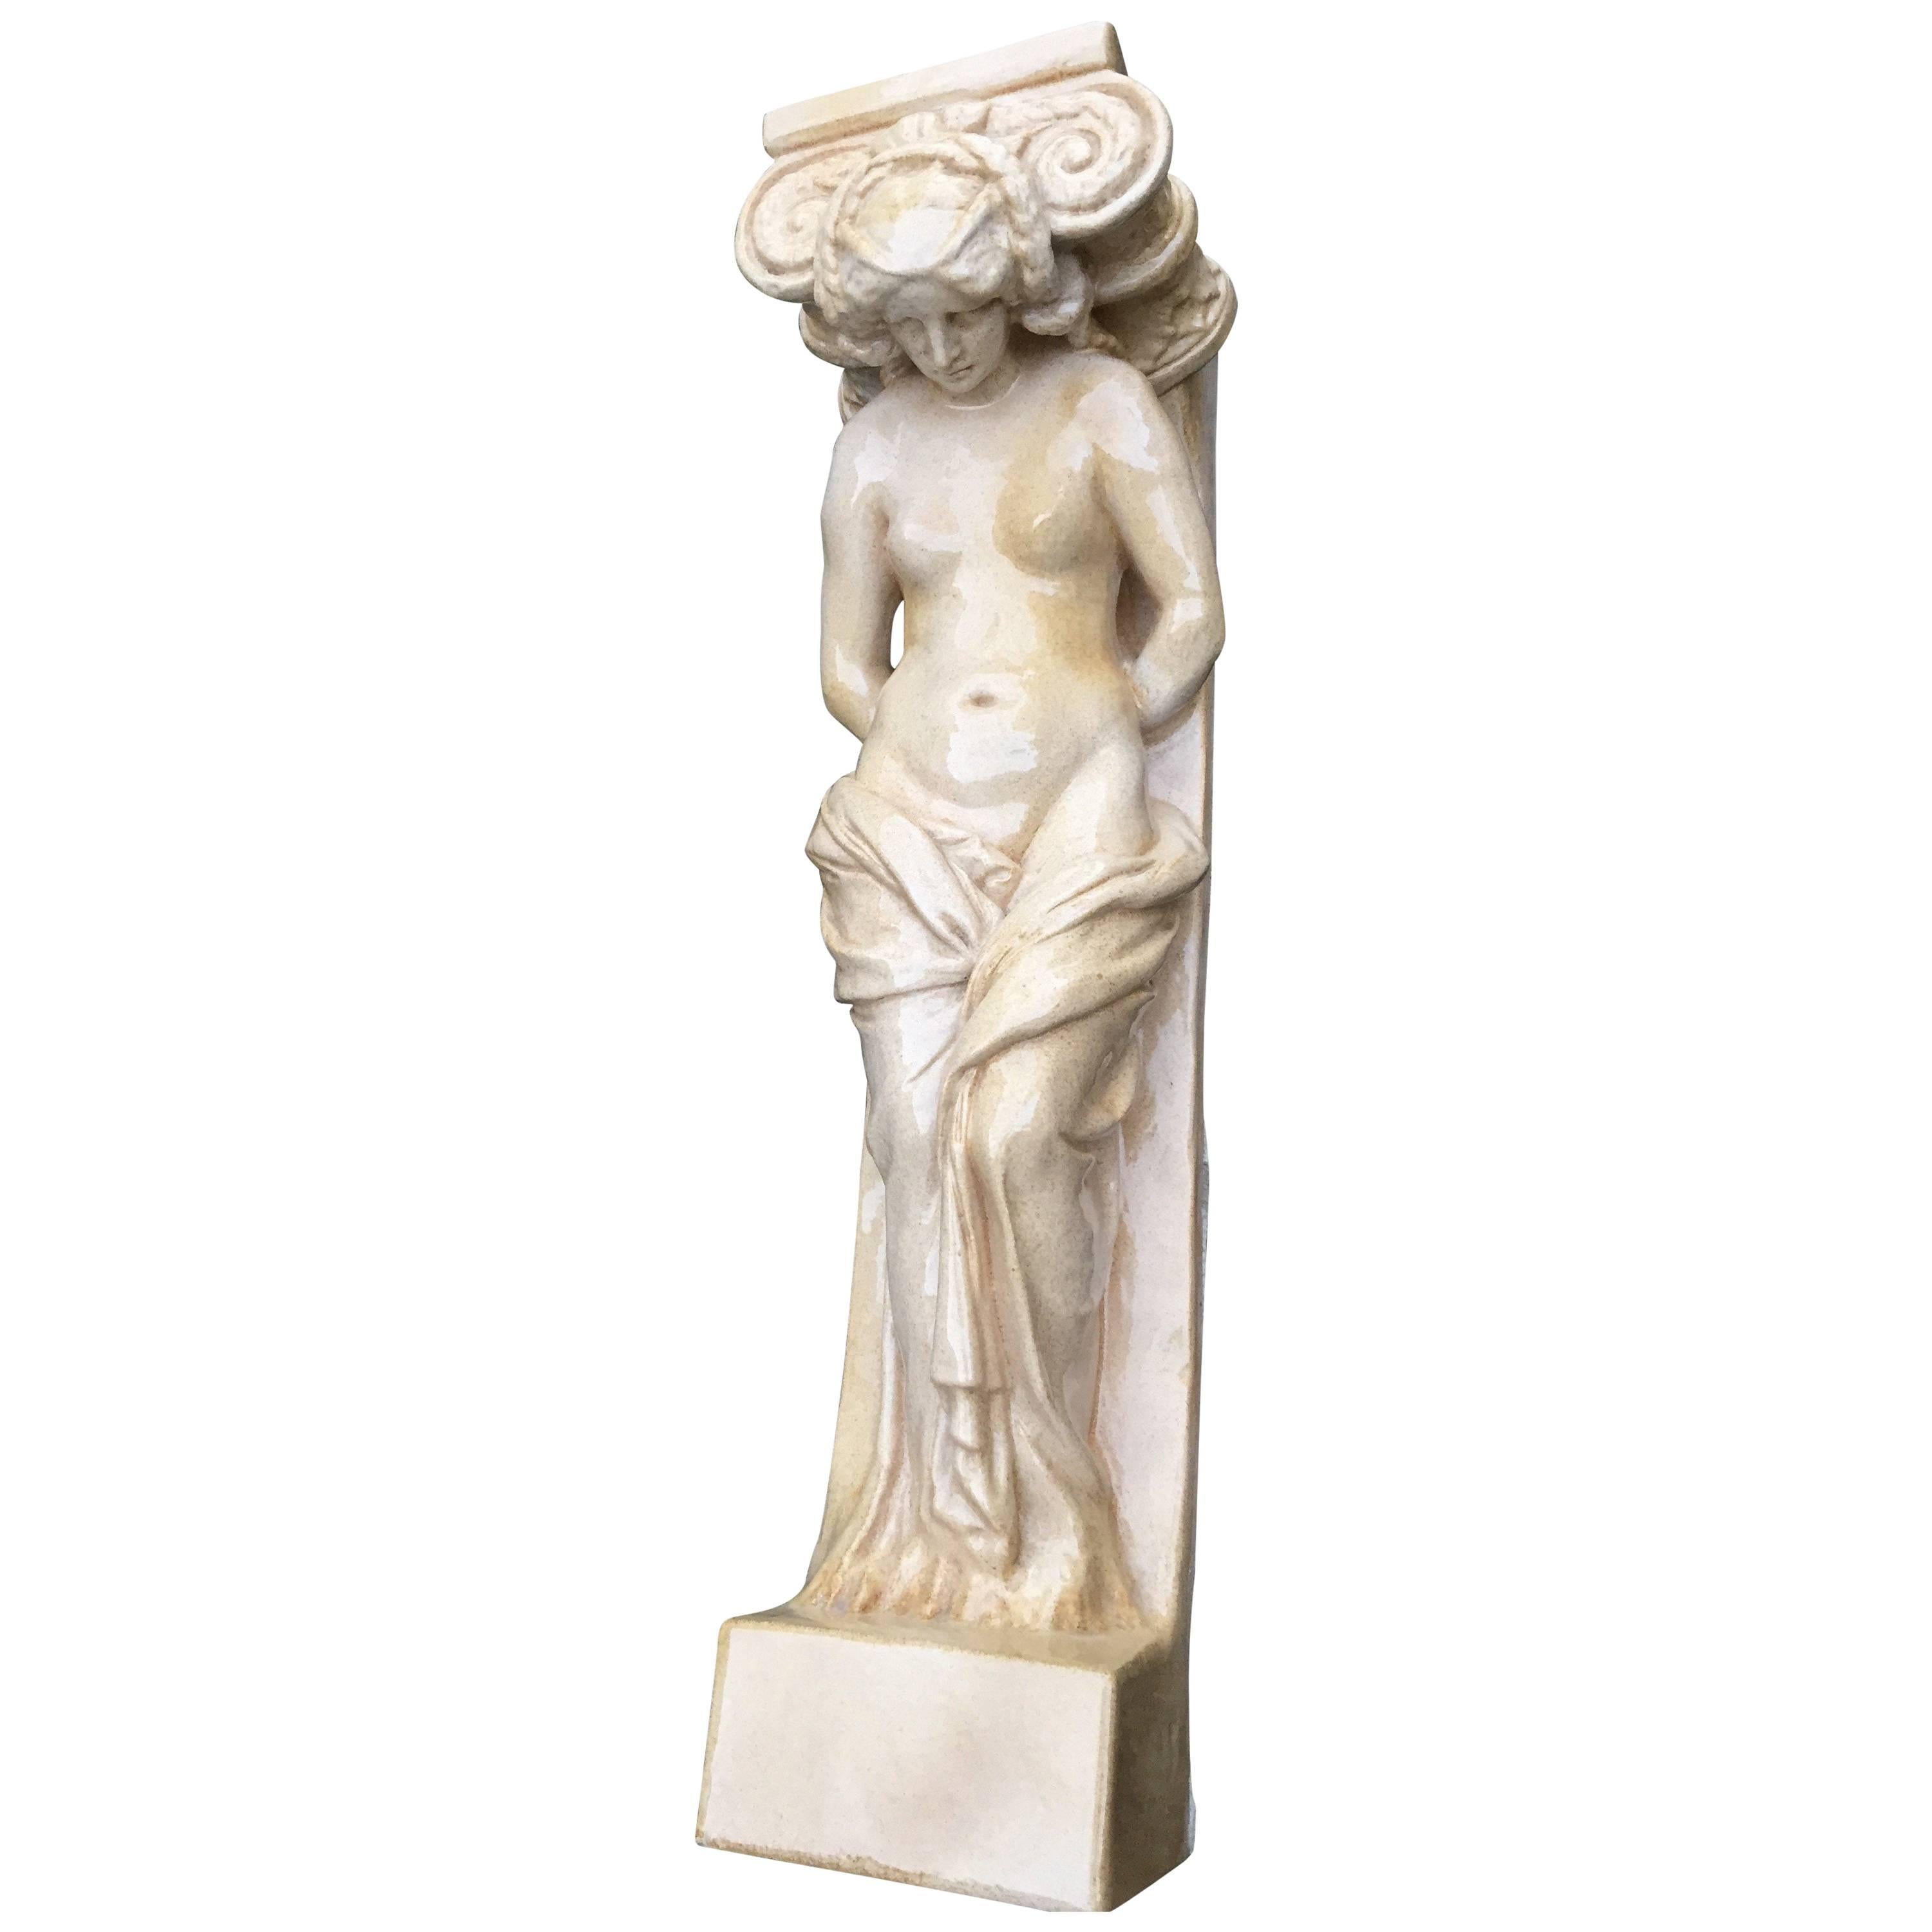 Caryatid in Bouffioux Sandstone Realized by Guerin, Inspired by Artus Quellin